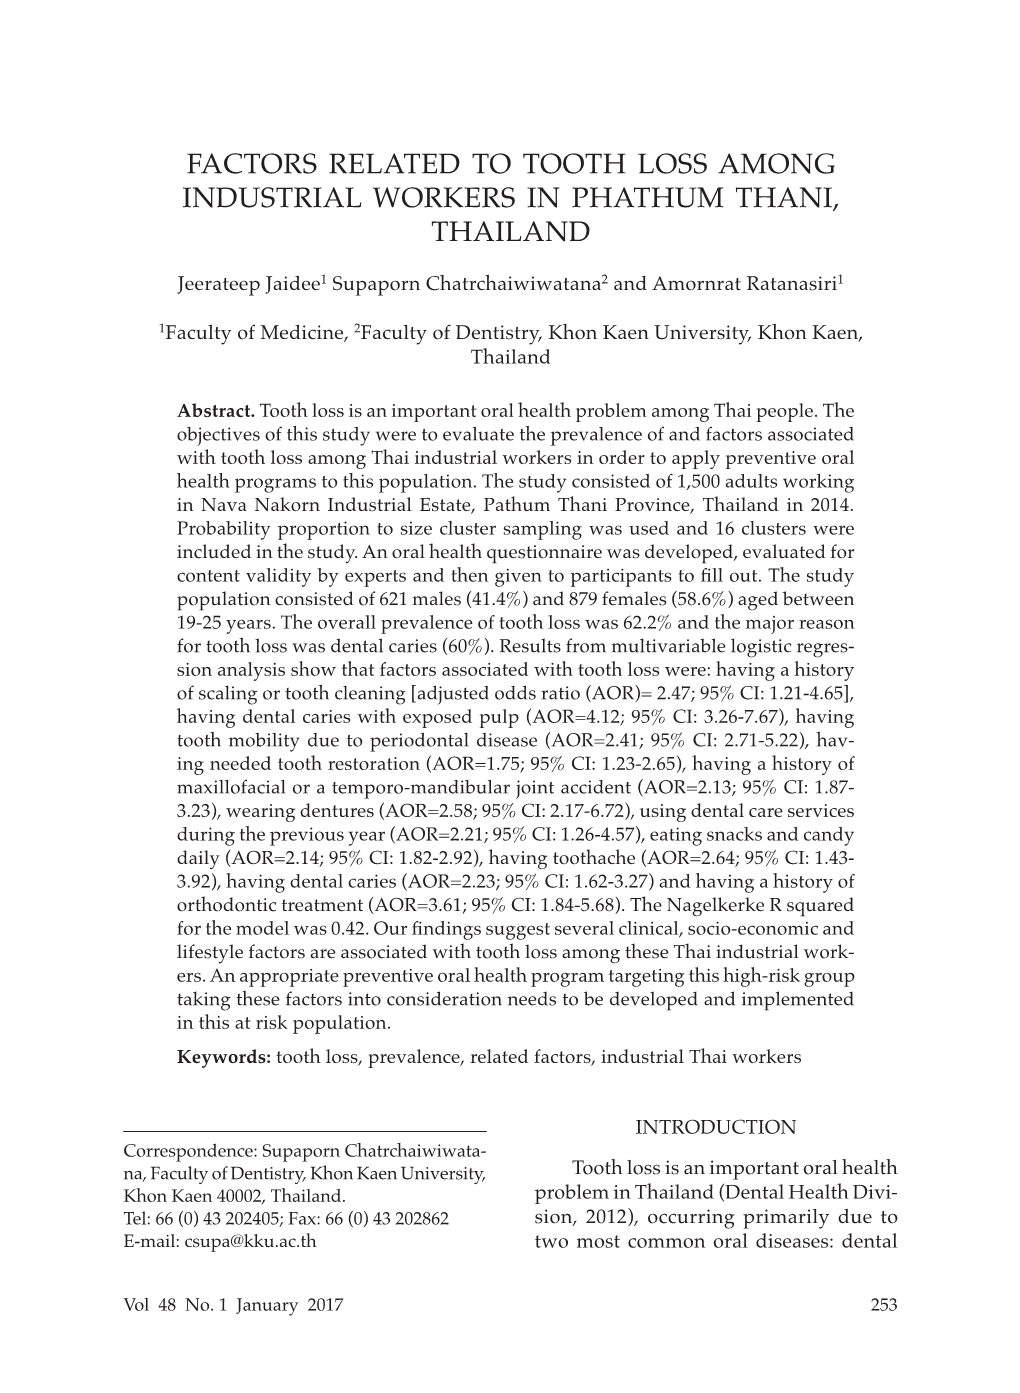 Factors Related to Tooth Loss Among Industrial Workers in Phathum Thani, Thailand